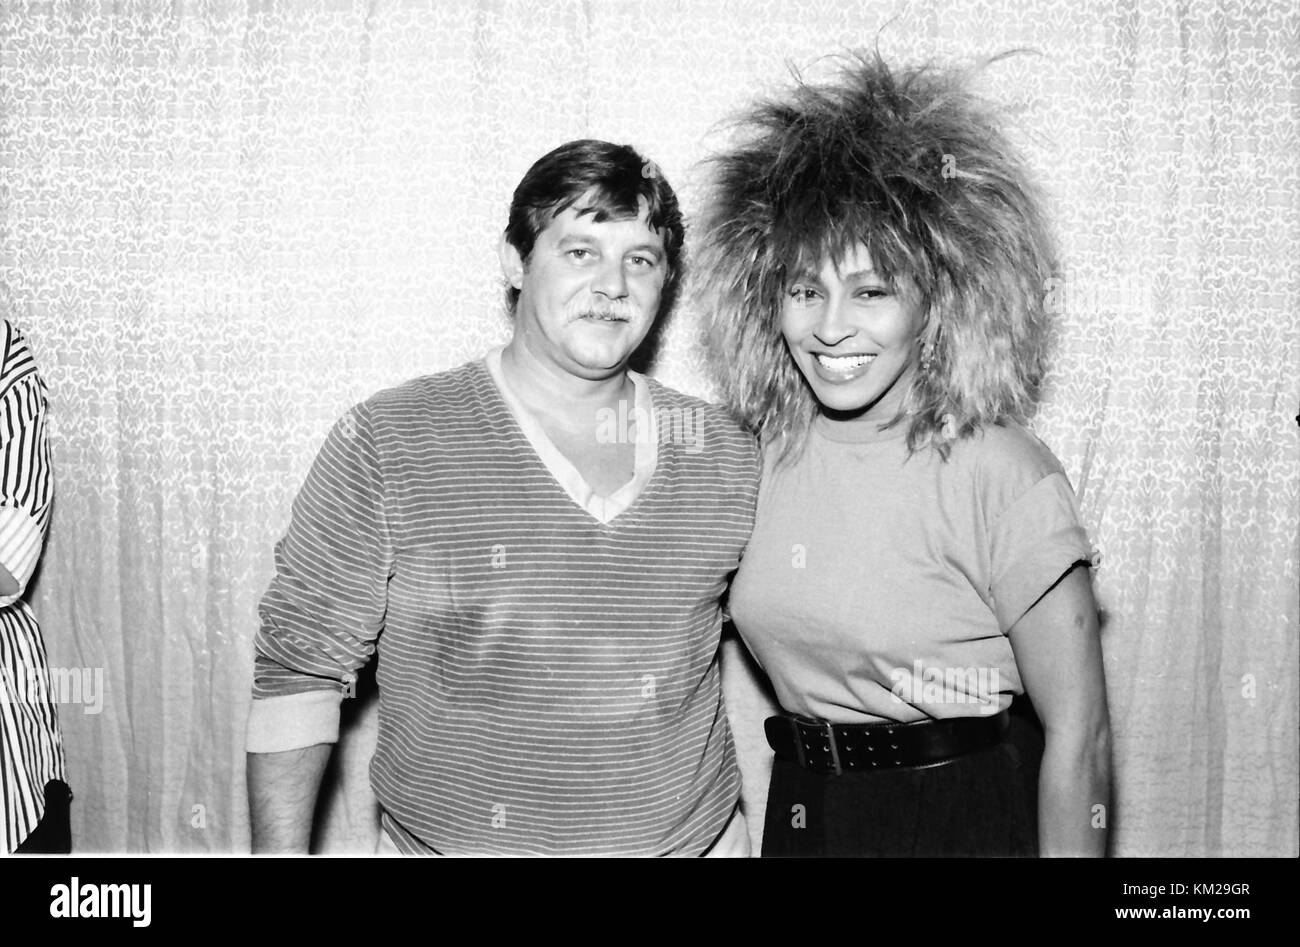 OAKLAND, CA - OCTOBER 1985: Tina Turner with record executive, backstage after her concert at the Oakland-Alameda County Coliseum in Oakland, California in October 1985. Credit: Pat Johnson/MediaPunch Stock Photo